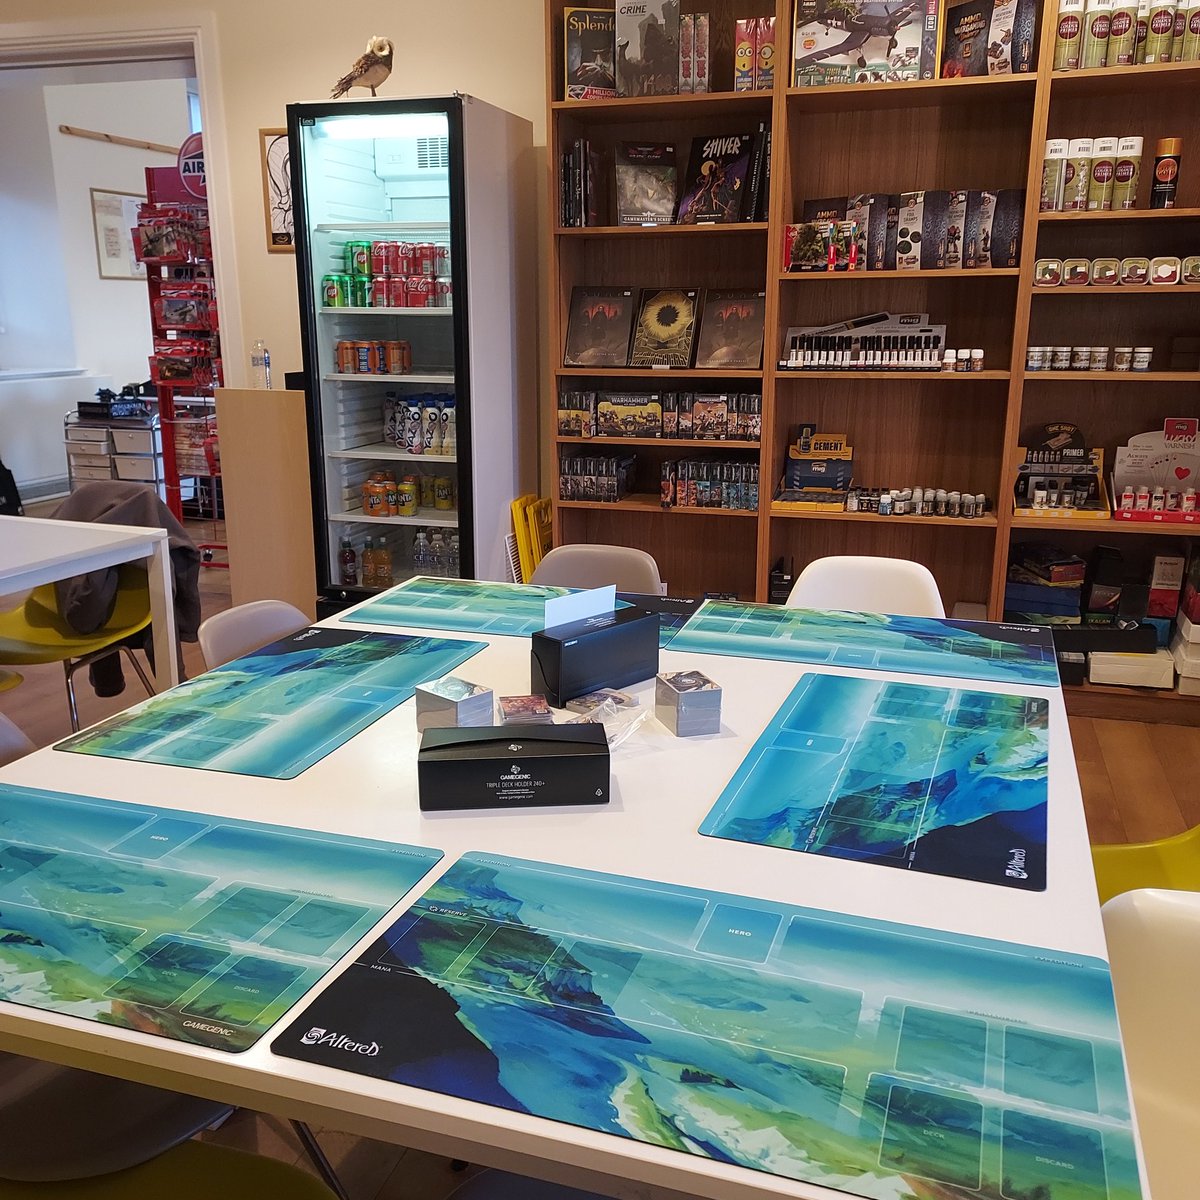 We're ready for @Altered_TCG in store today! Platform One - Kilmarnock Train Station. Absolutely thrilled to be part of the Preview Roadshow. Get yourselves down for a free intro! #altered #tcg #Scotland